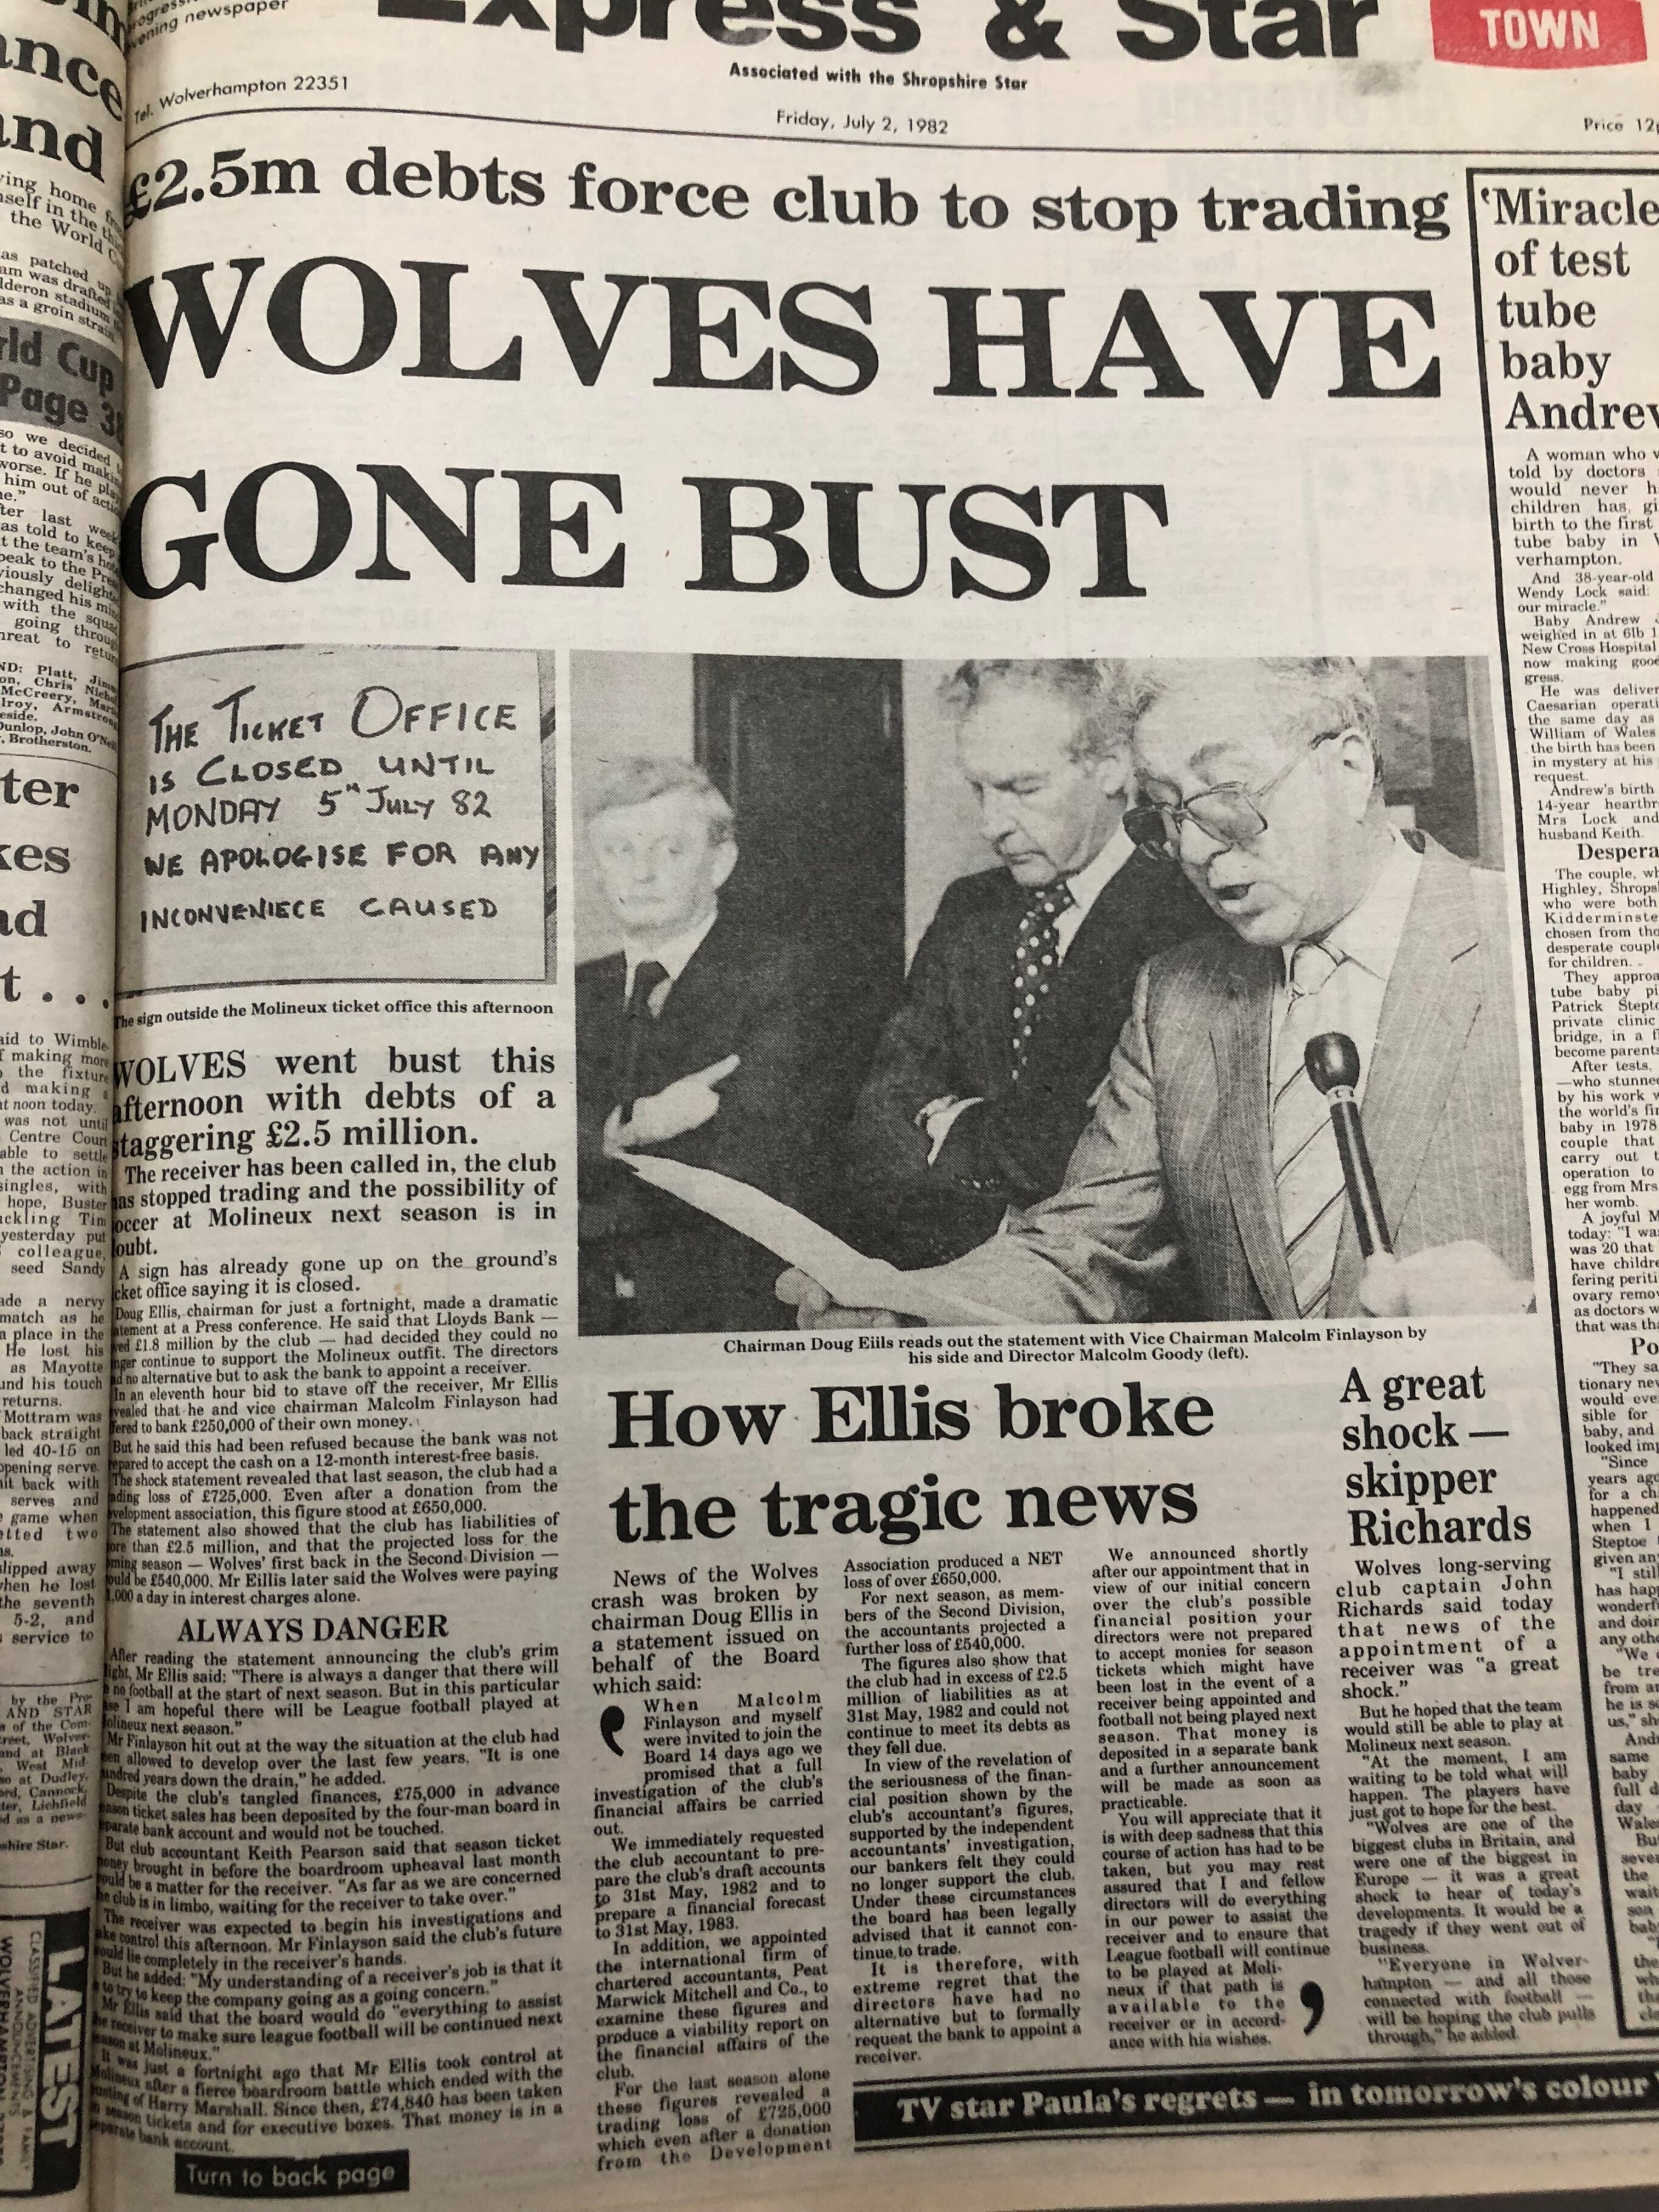 When Wolves went bankrupt – 40 years on